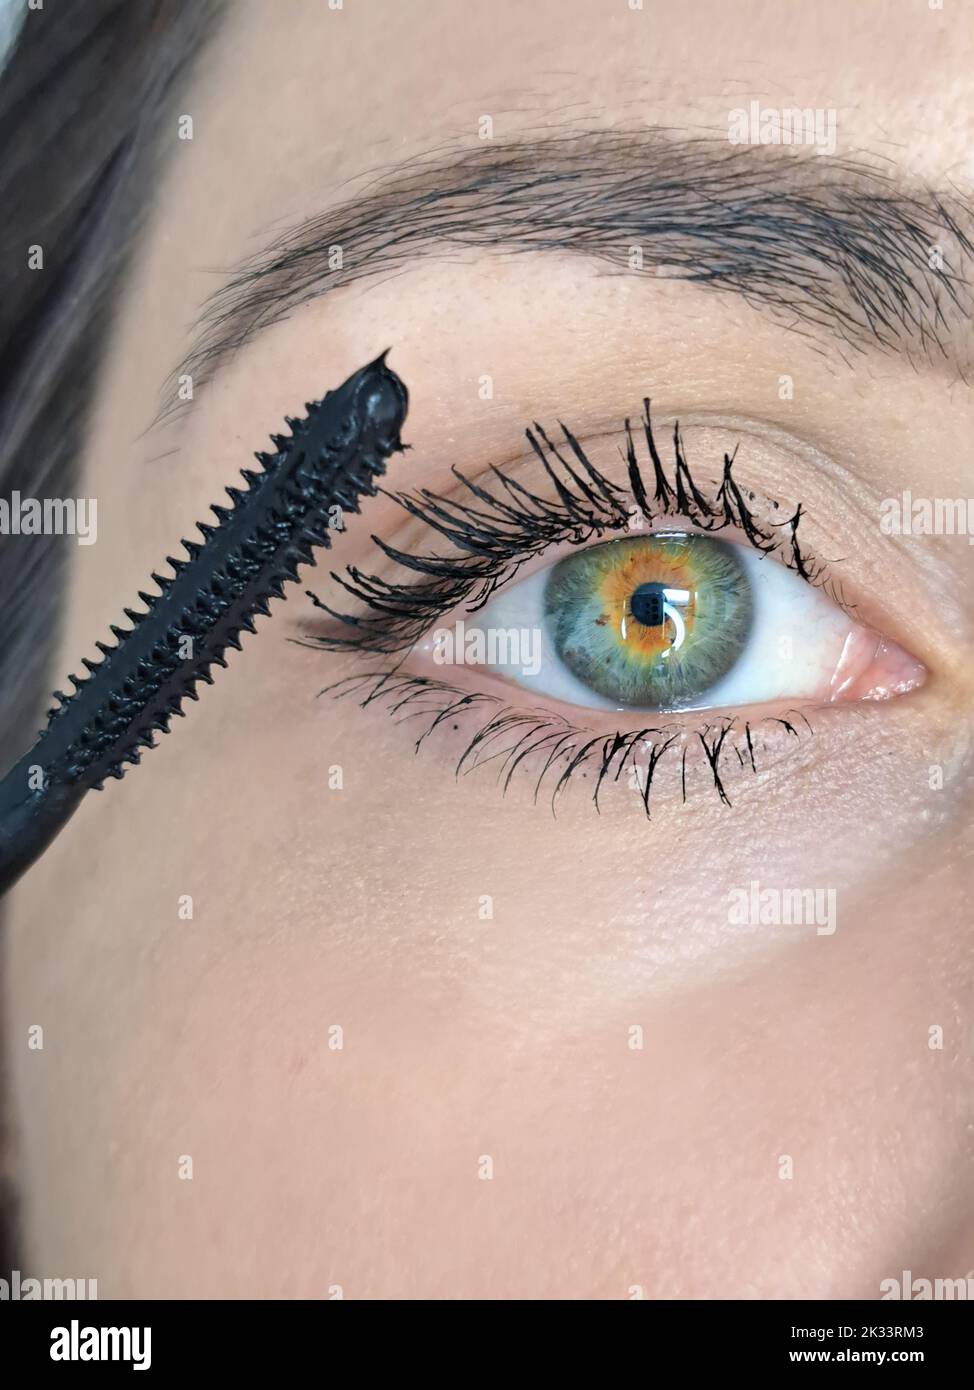 Close up of woman's eye mascara against lash extensions  Stock Photo